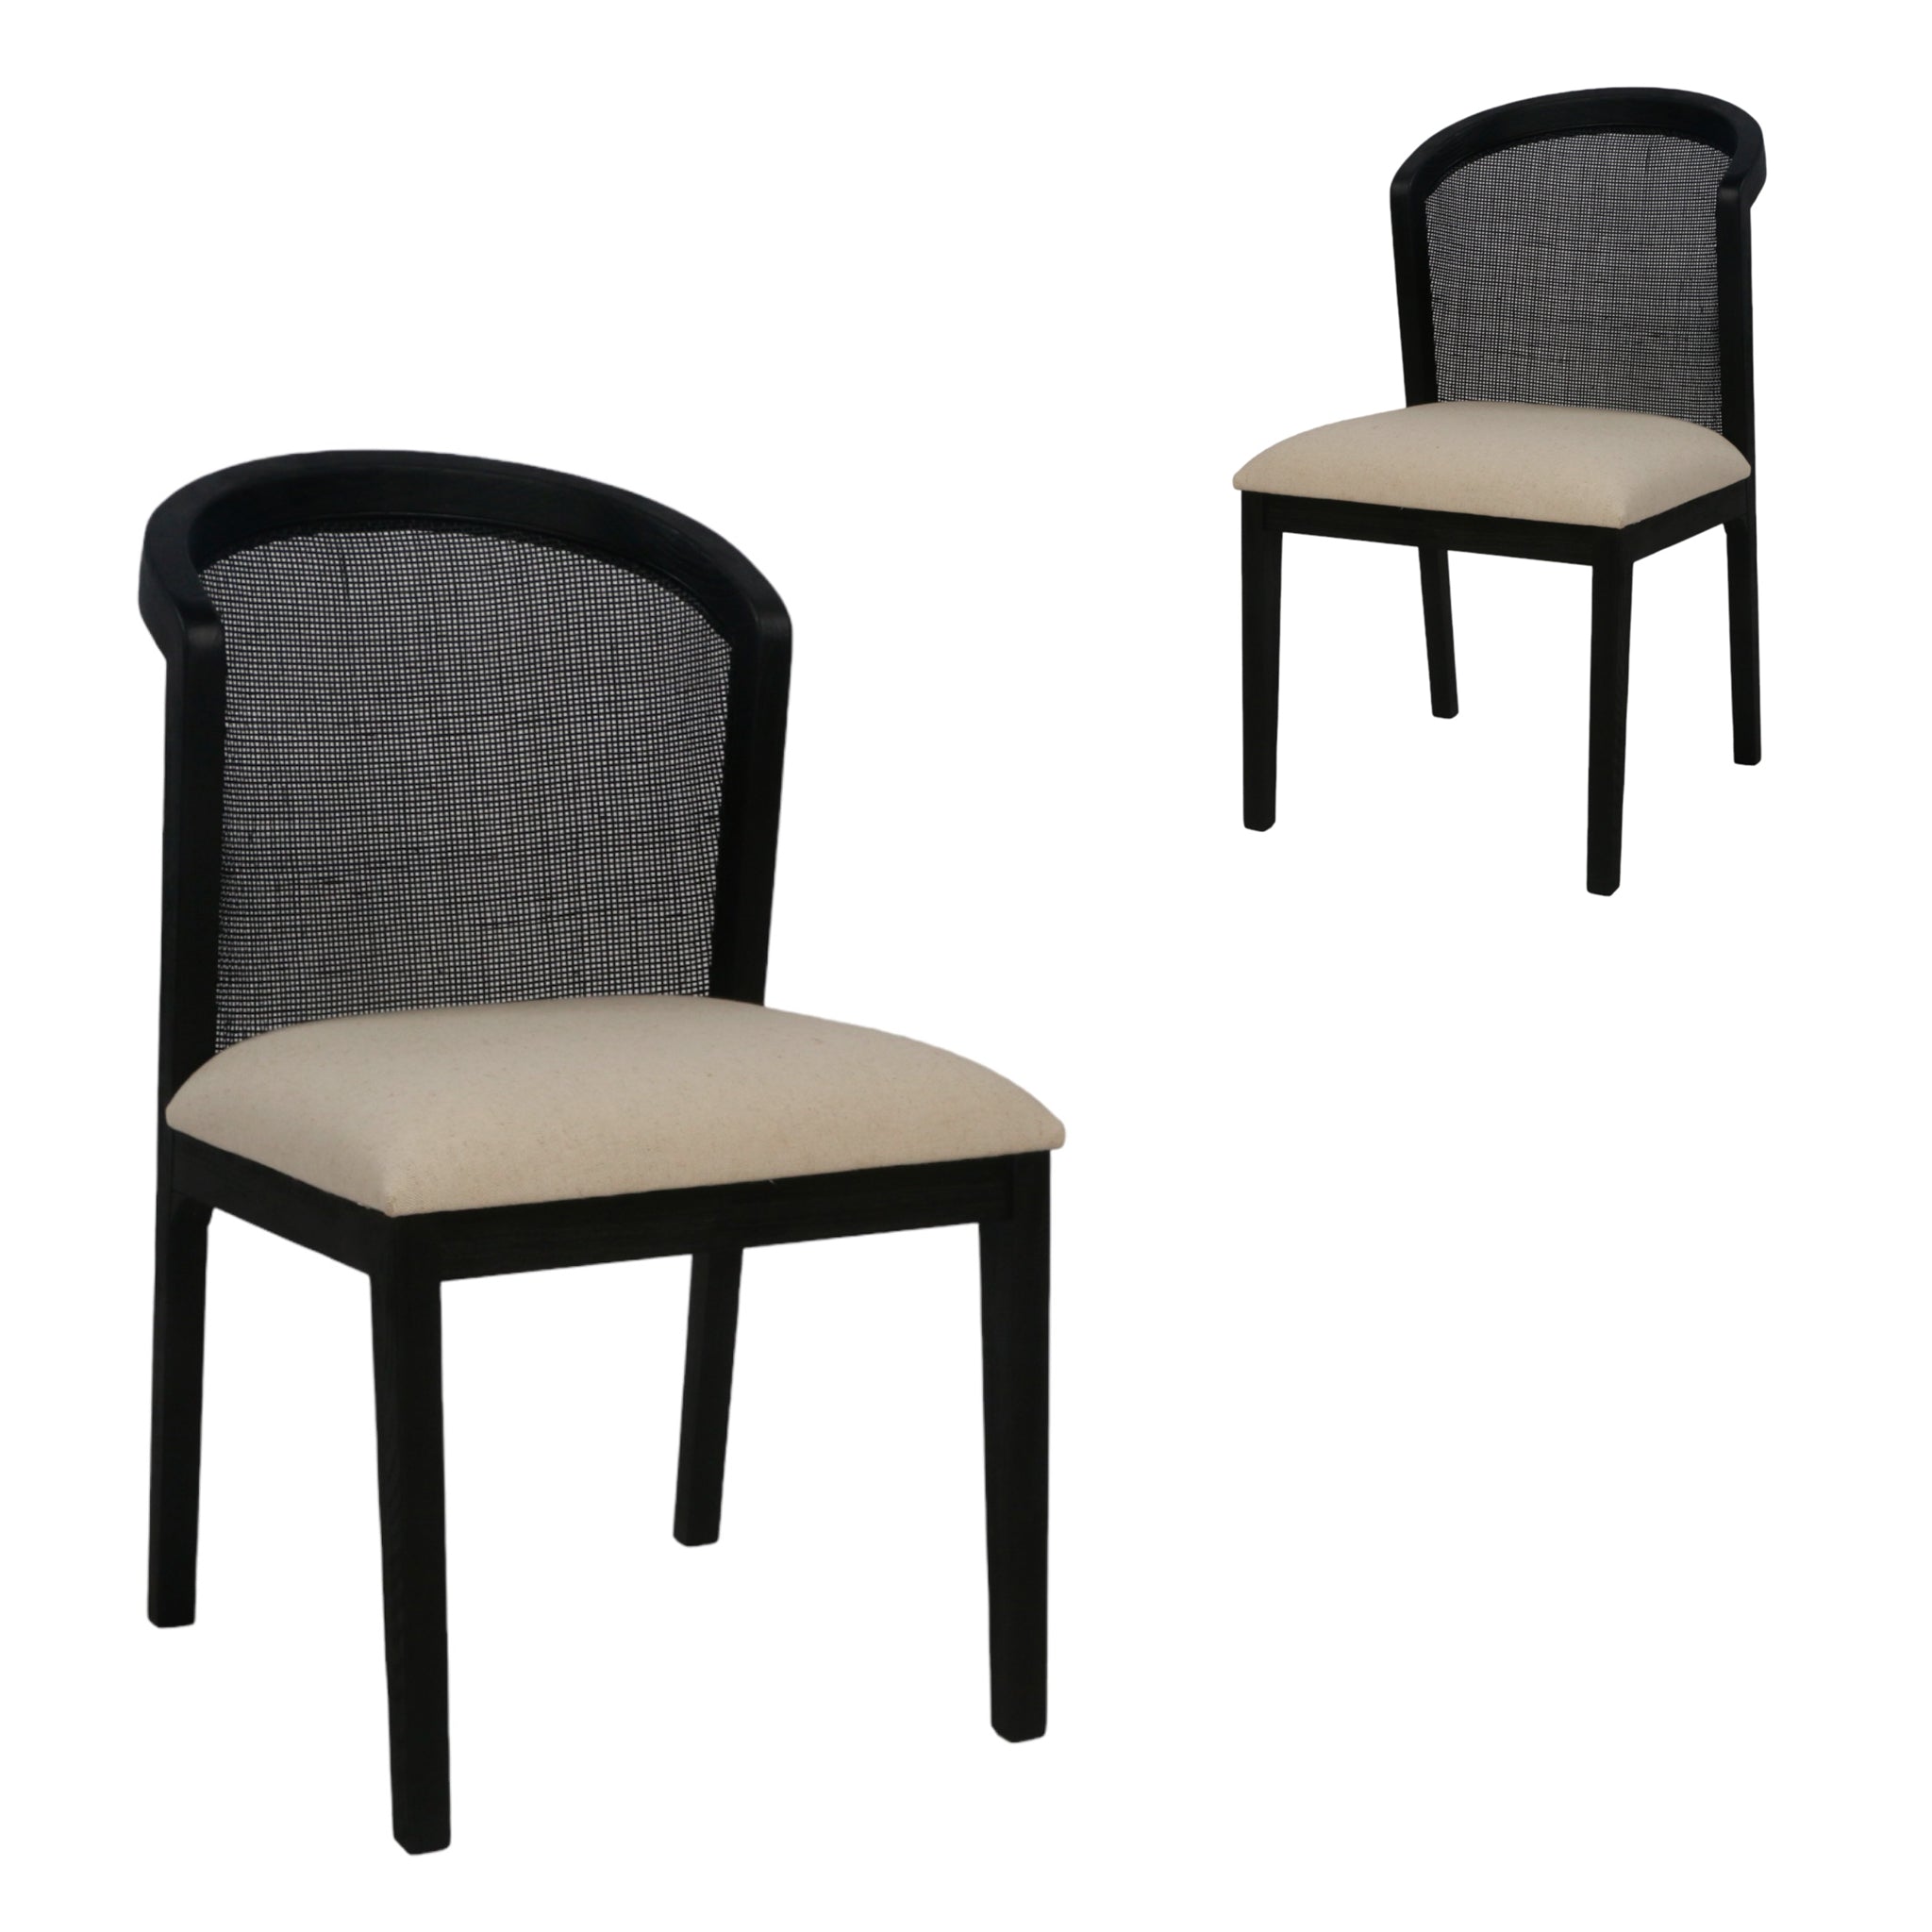 Set of 2 Edward Elm Dining Chair - Black - Dining Chairs